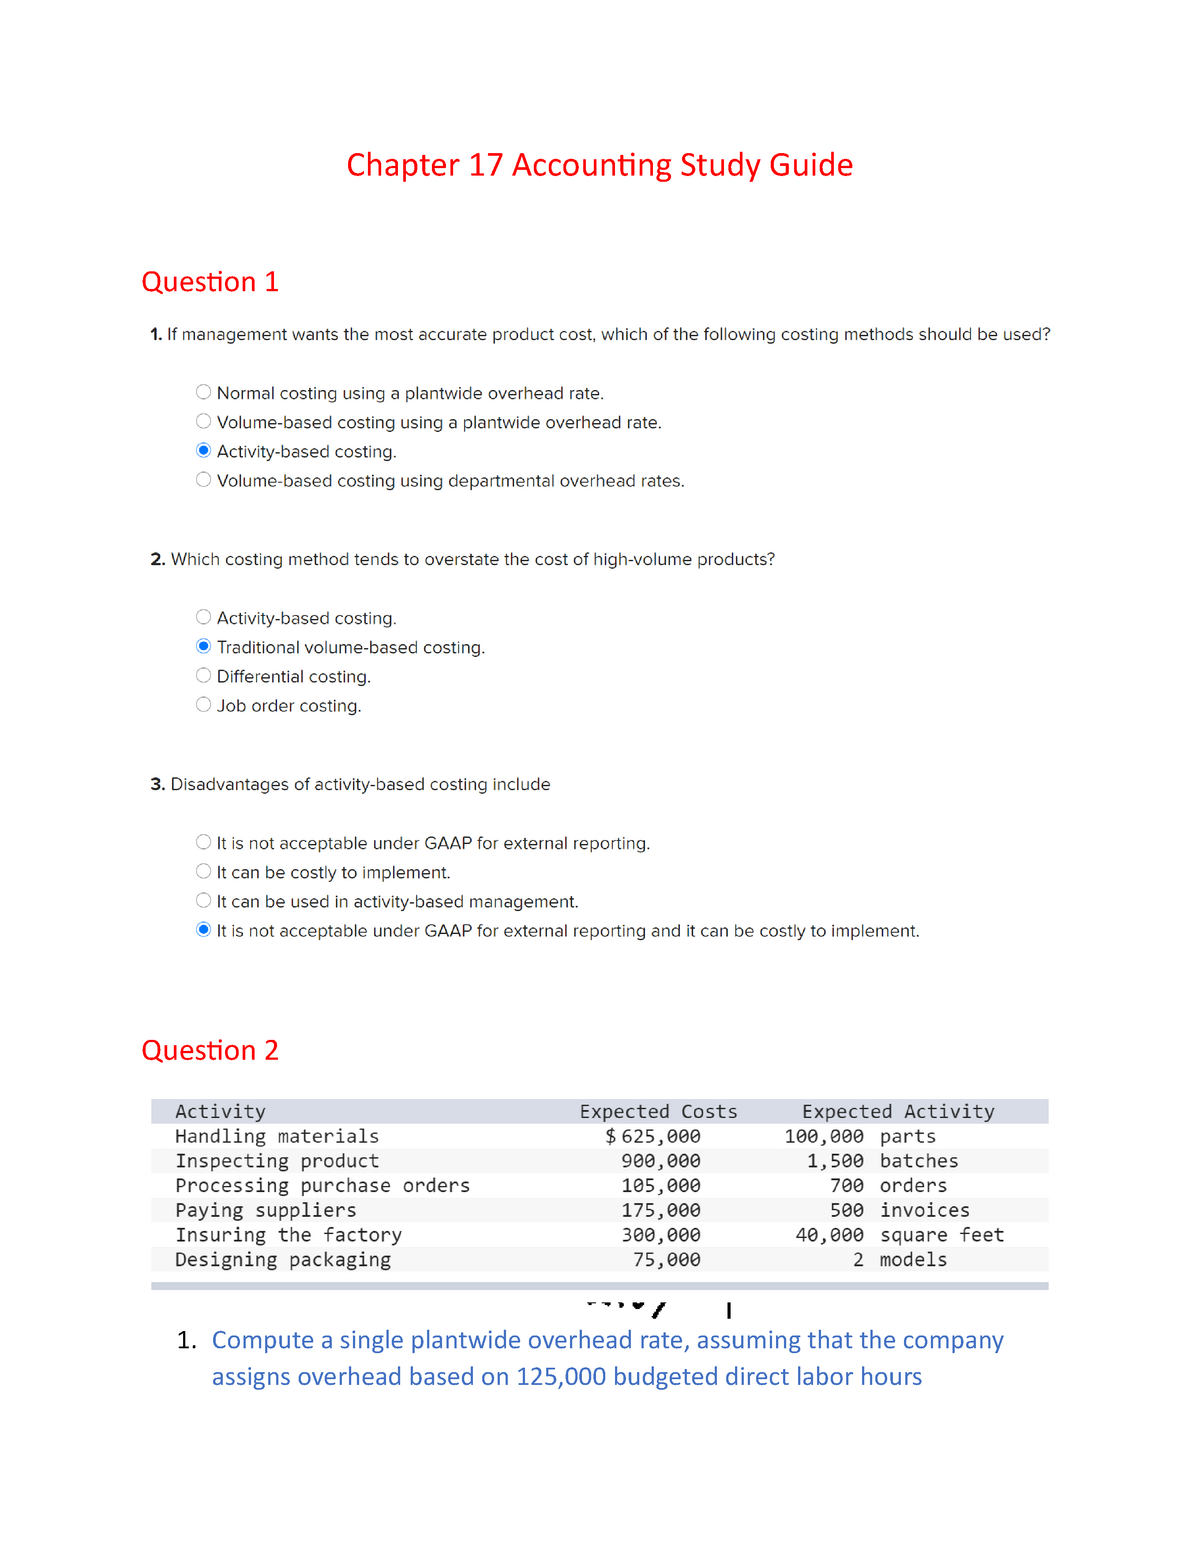 case study questions on accounting principles